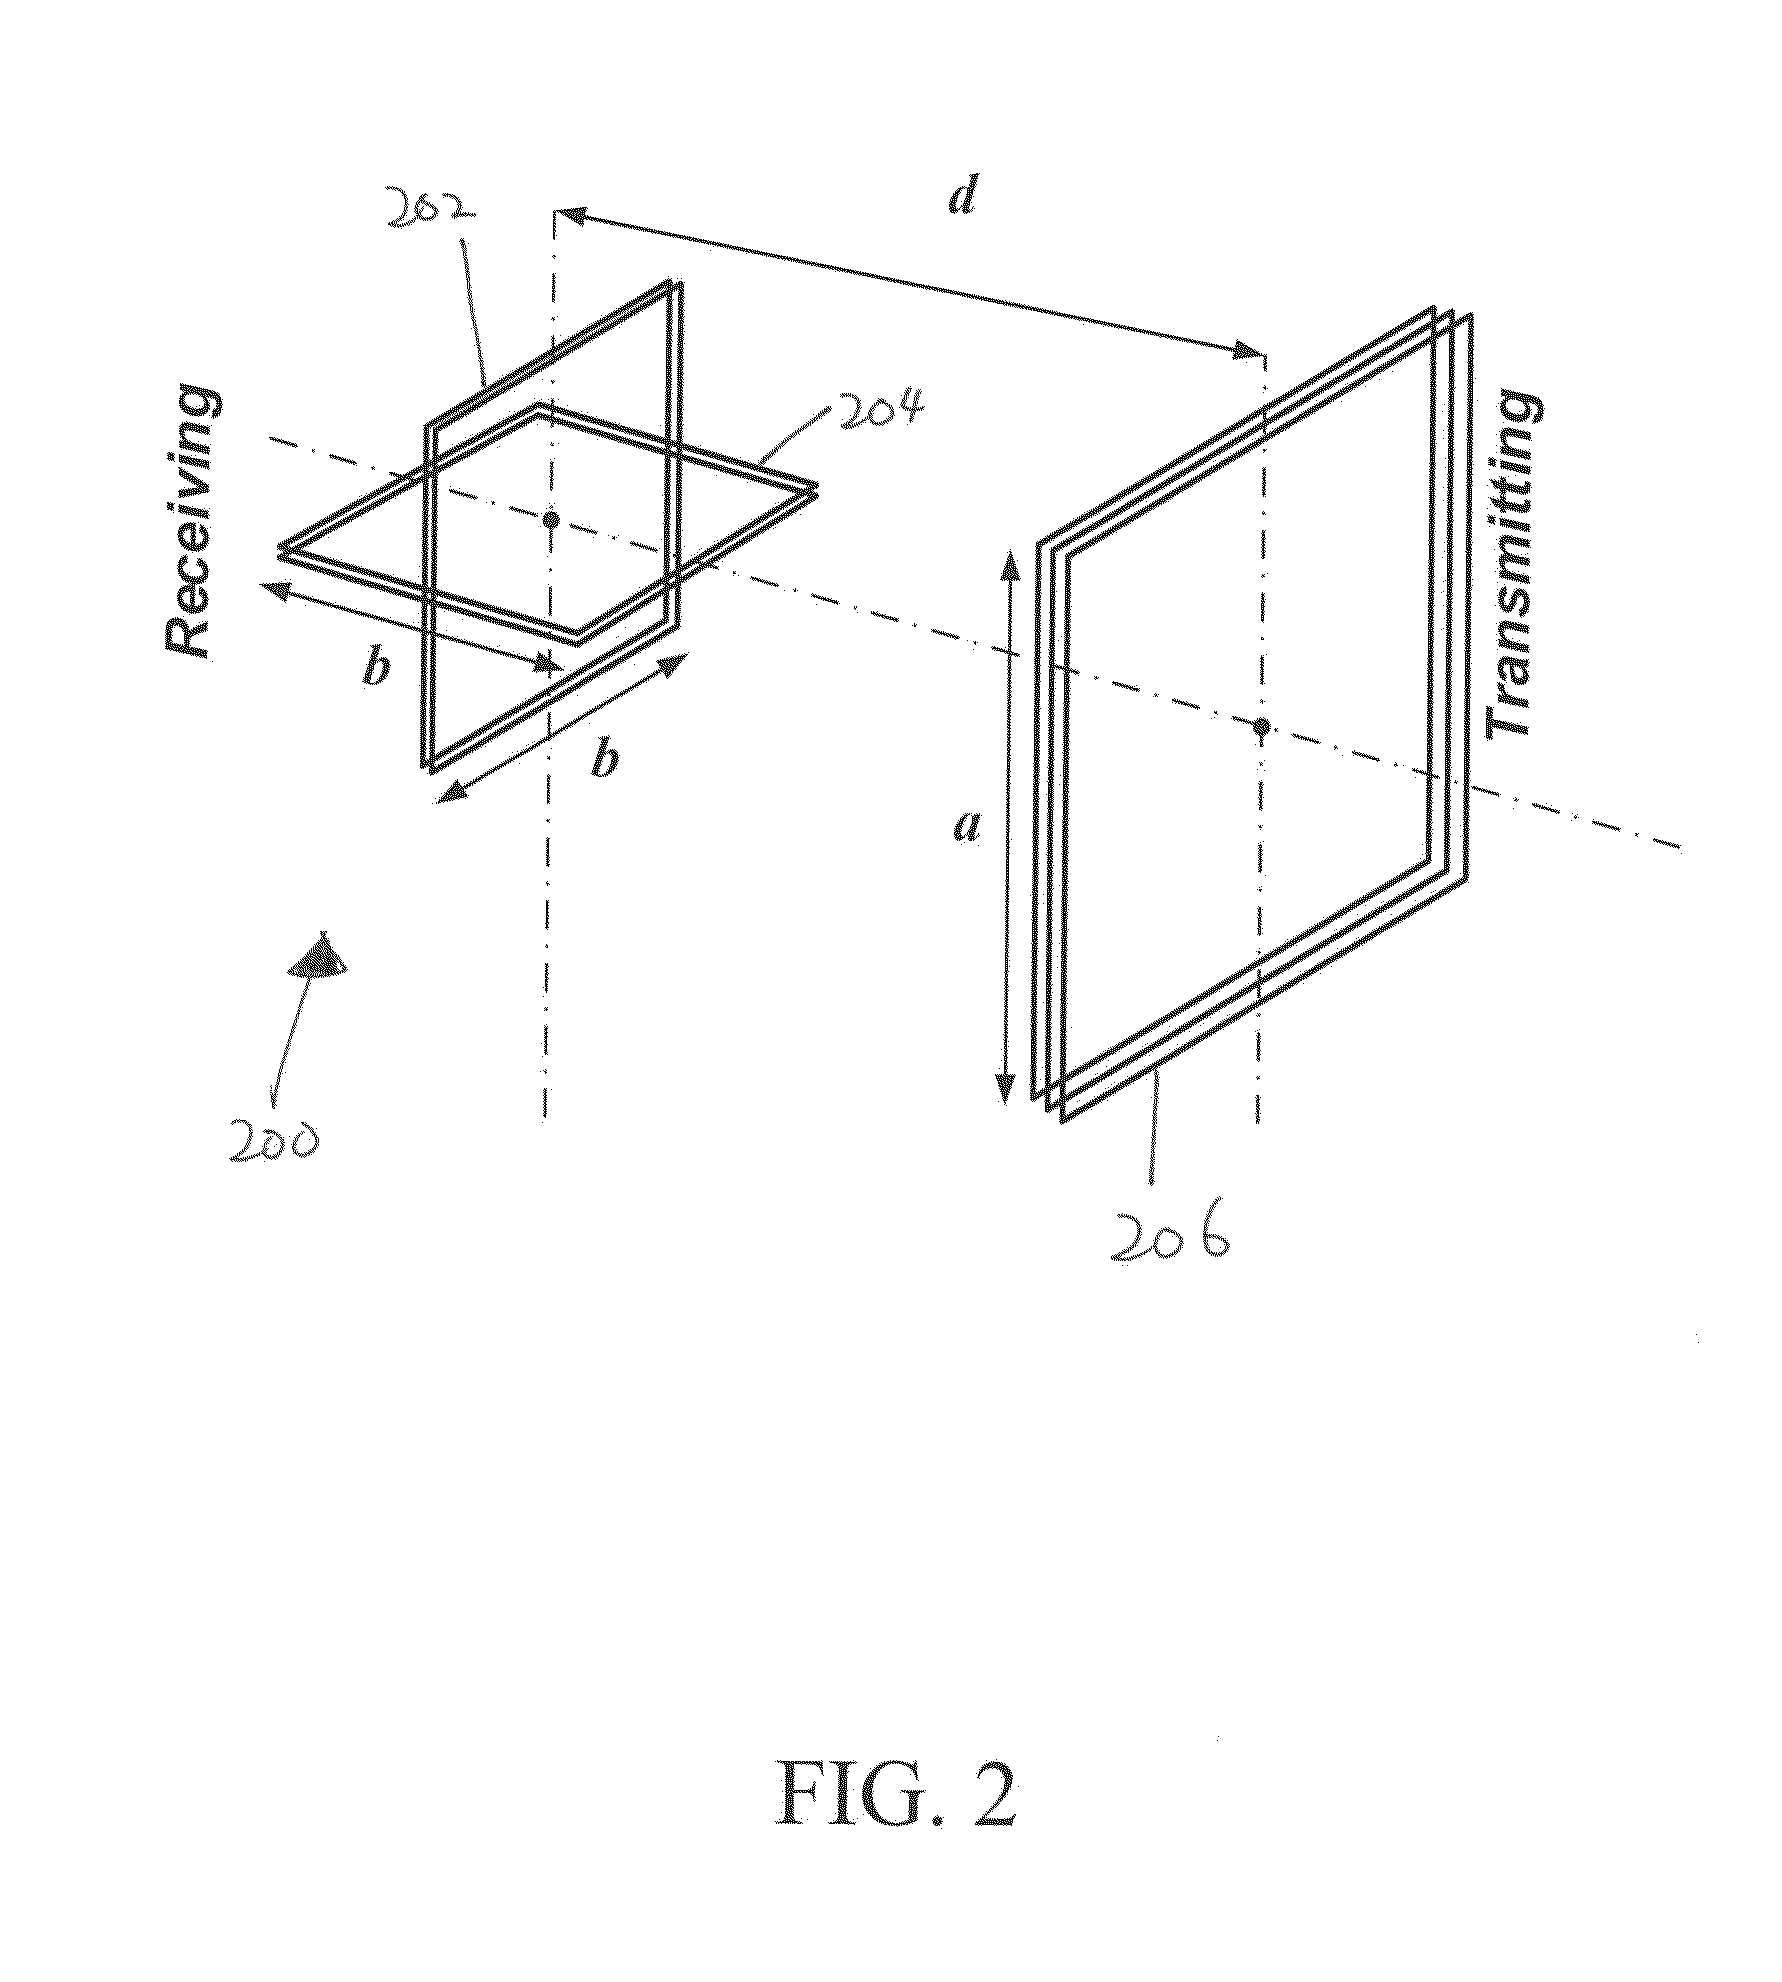 Apparatus for transferring electromagnetic energy